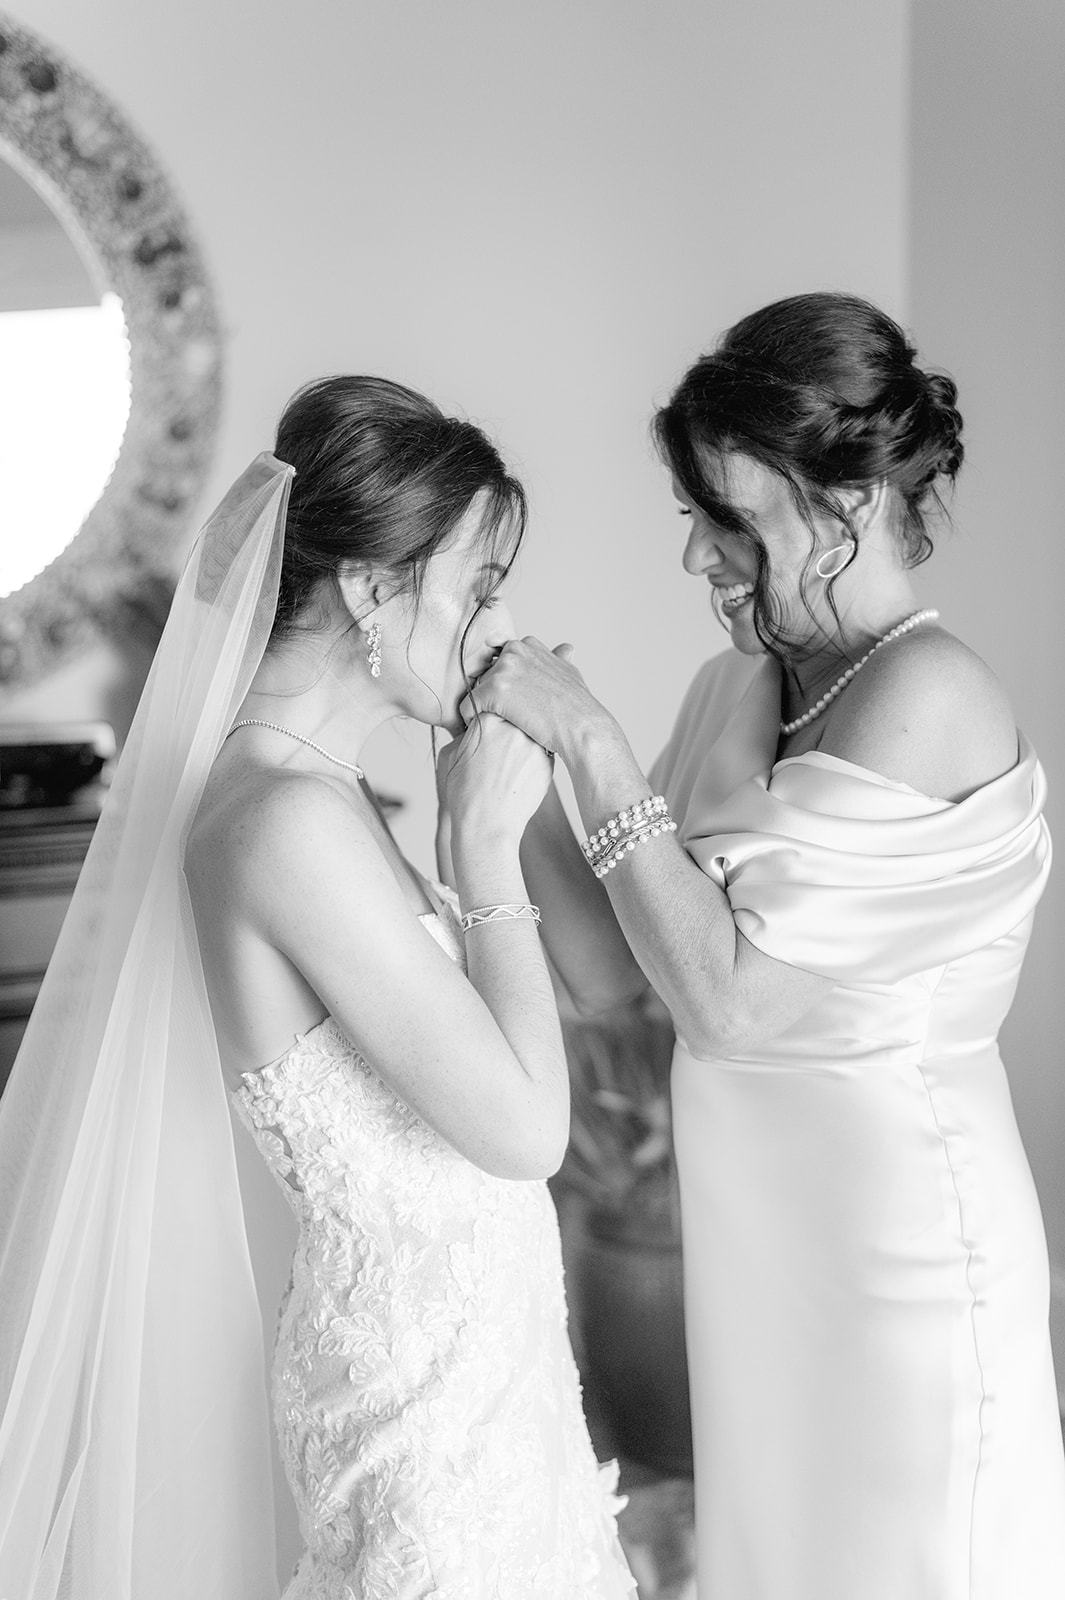 Professional Photographer for Your Marco Island Wedding
